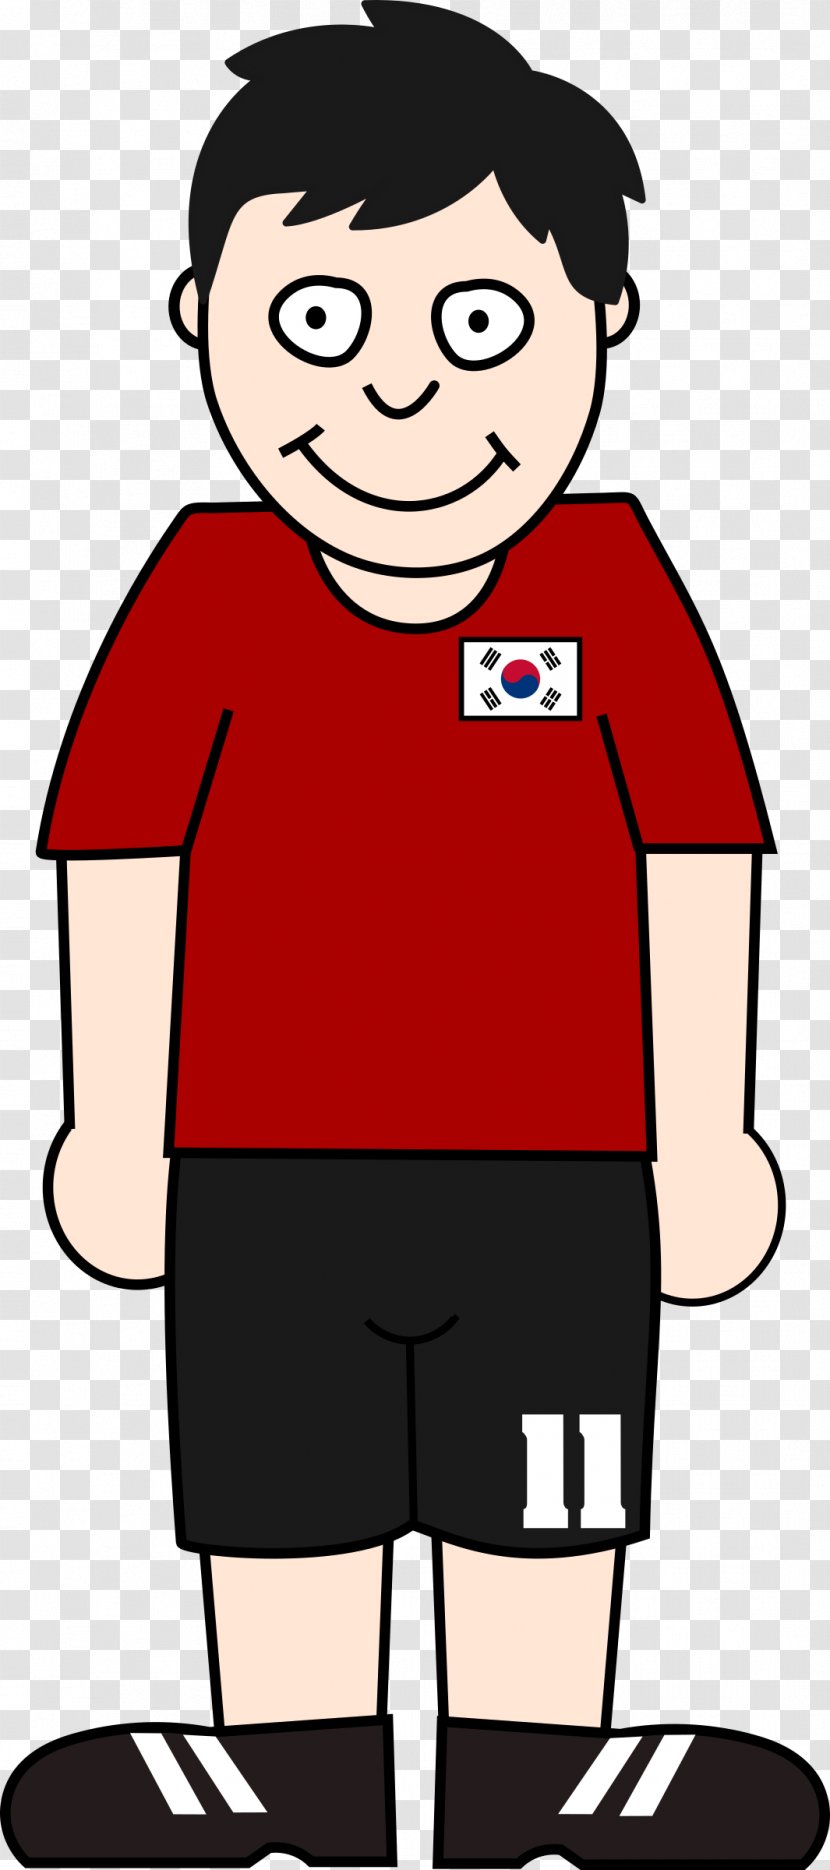 South Korea National Football Team 2018 World Cup Serbia - Flower - SOUTH FOOTBALL Transparent PNG